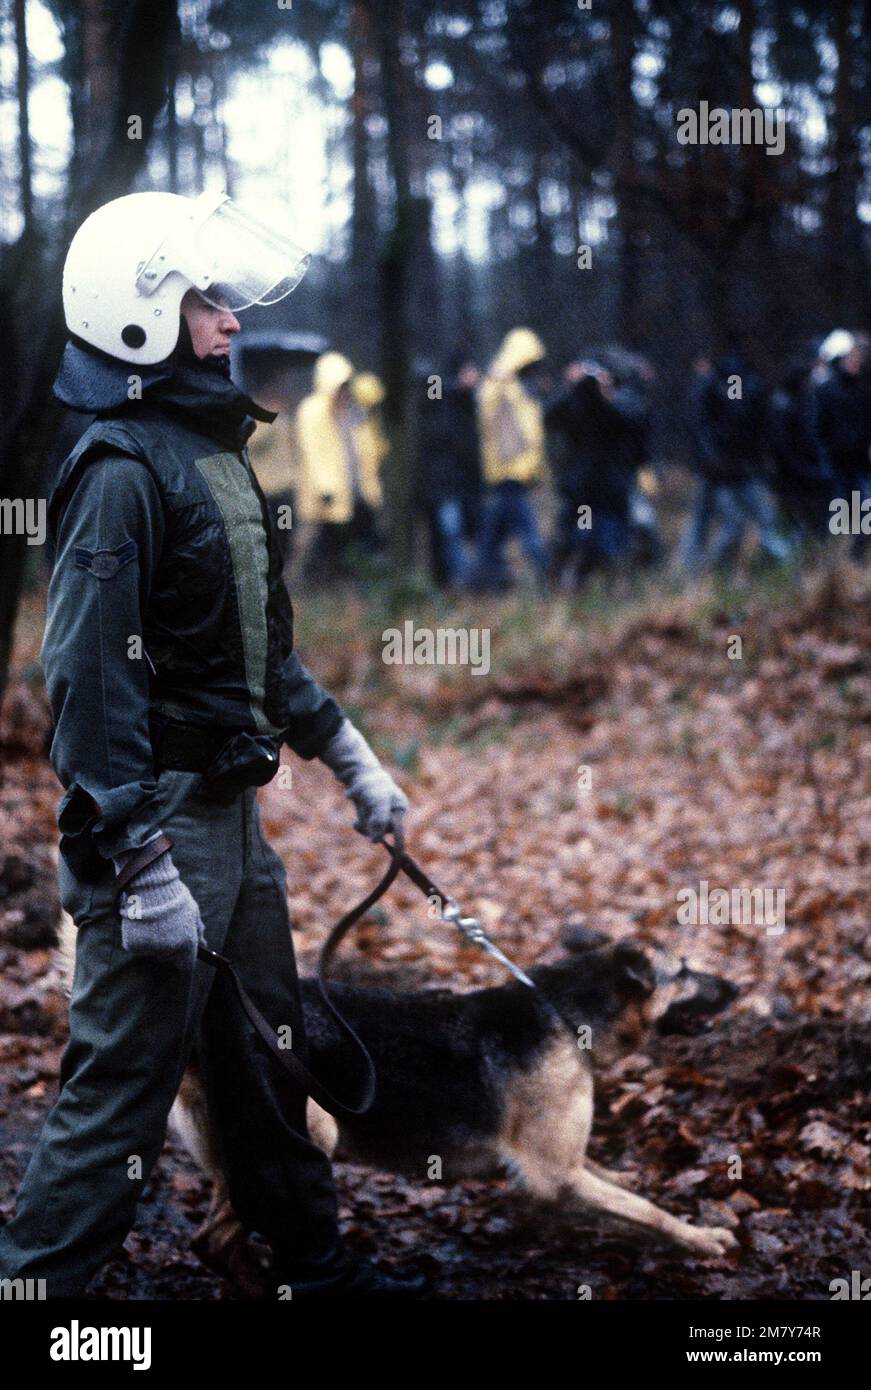 AIRMAN 1ST Class Kenneth Liddle and his canine partner move along parallel to protesters marching outside the perimeter fence. The protesters are demonstrating peacefully against NATO's decision to deploy Pershing II and cruise missiles in Western Europe. Base: Rhein-Main Air Base Country: Deutschland / Germany (DEU) Stock Photo